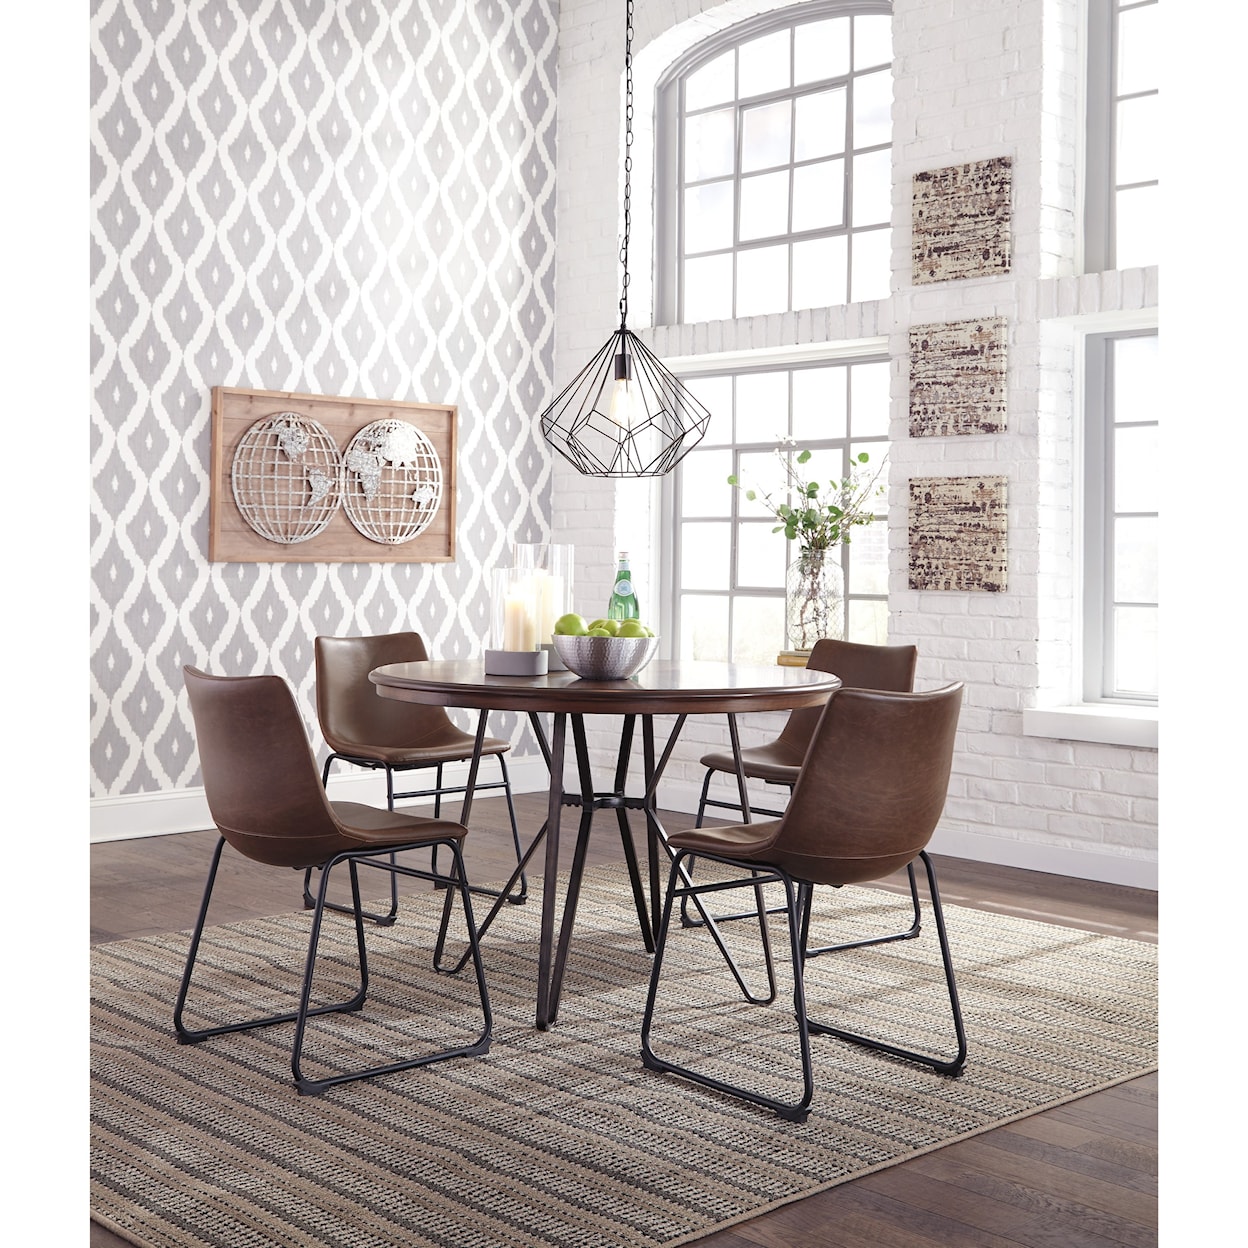 Signature Design by Ashley Centiar Dining Table